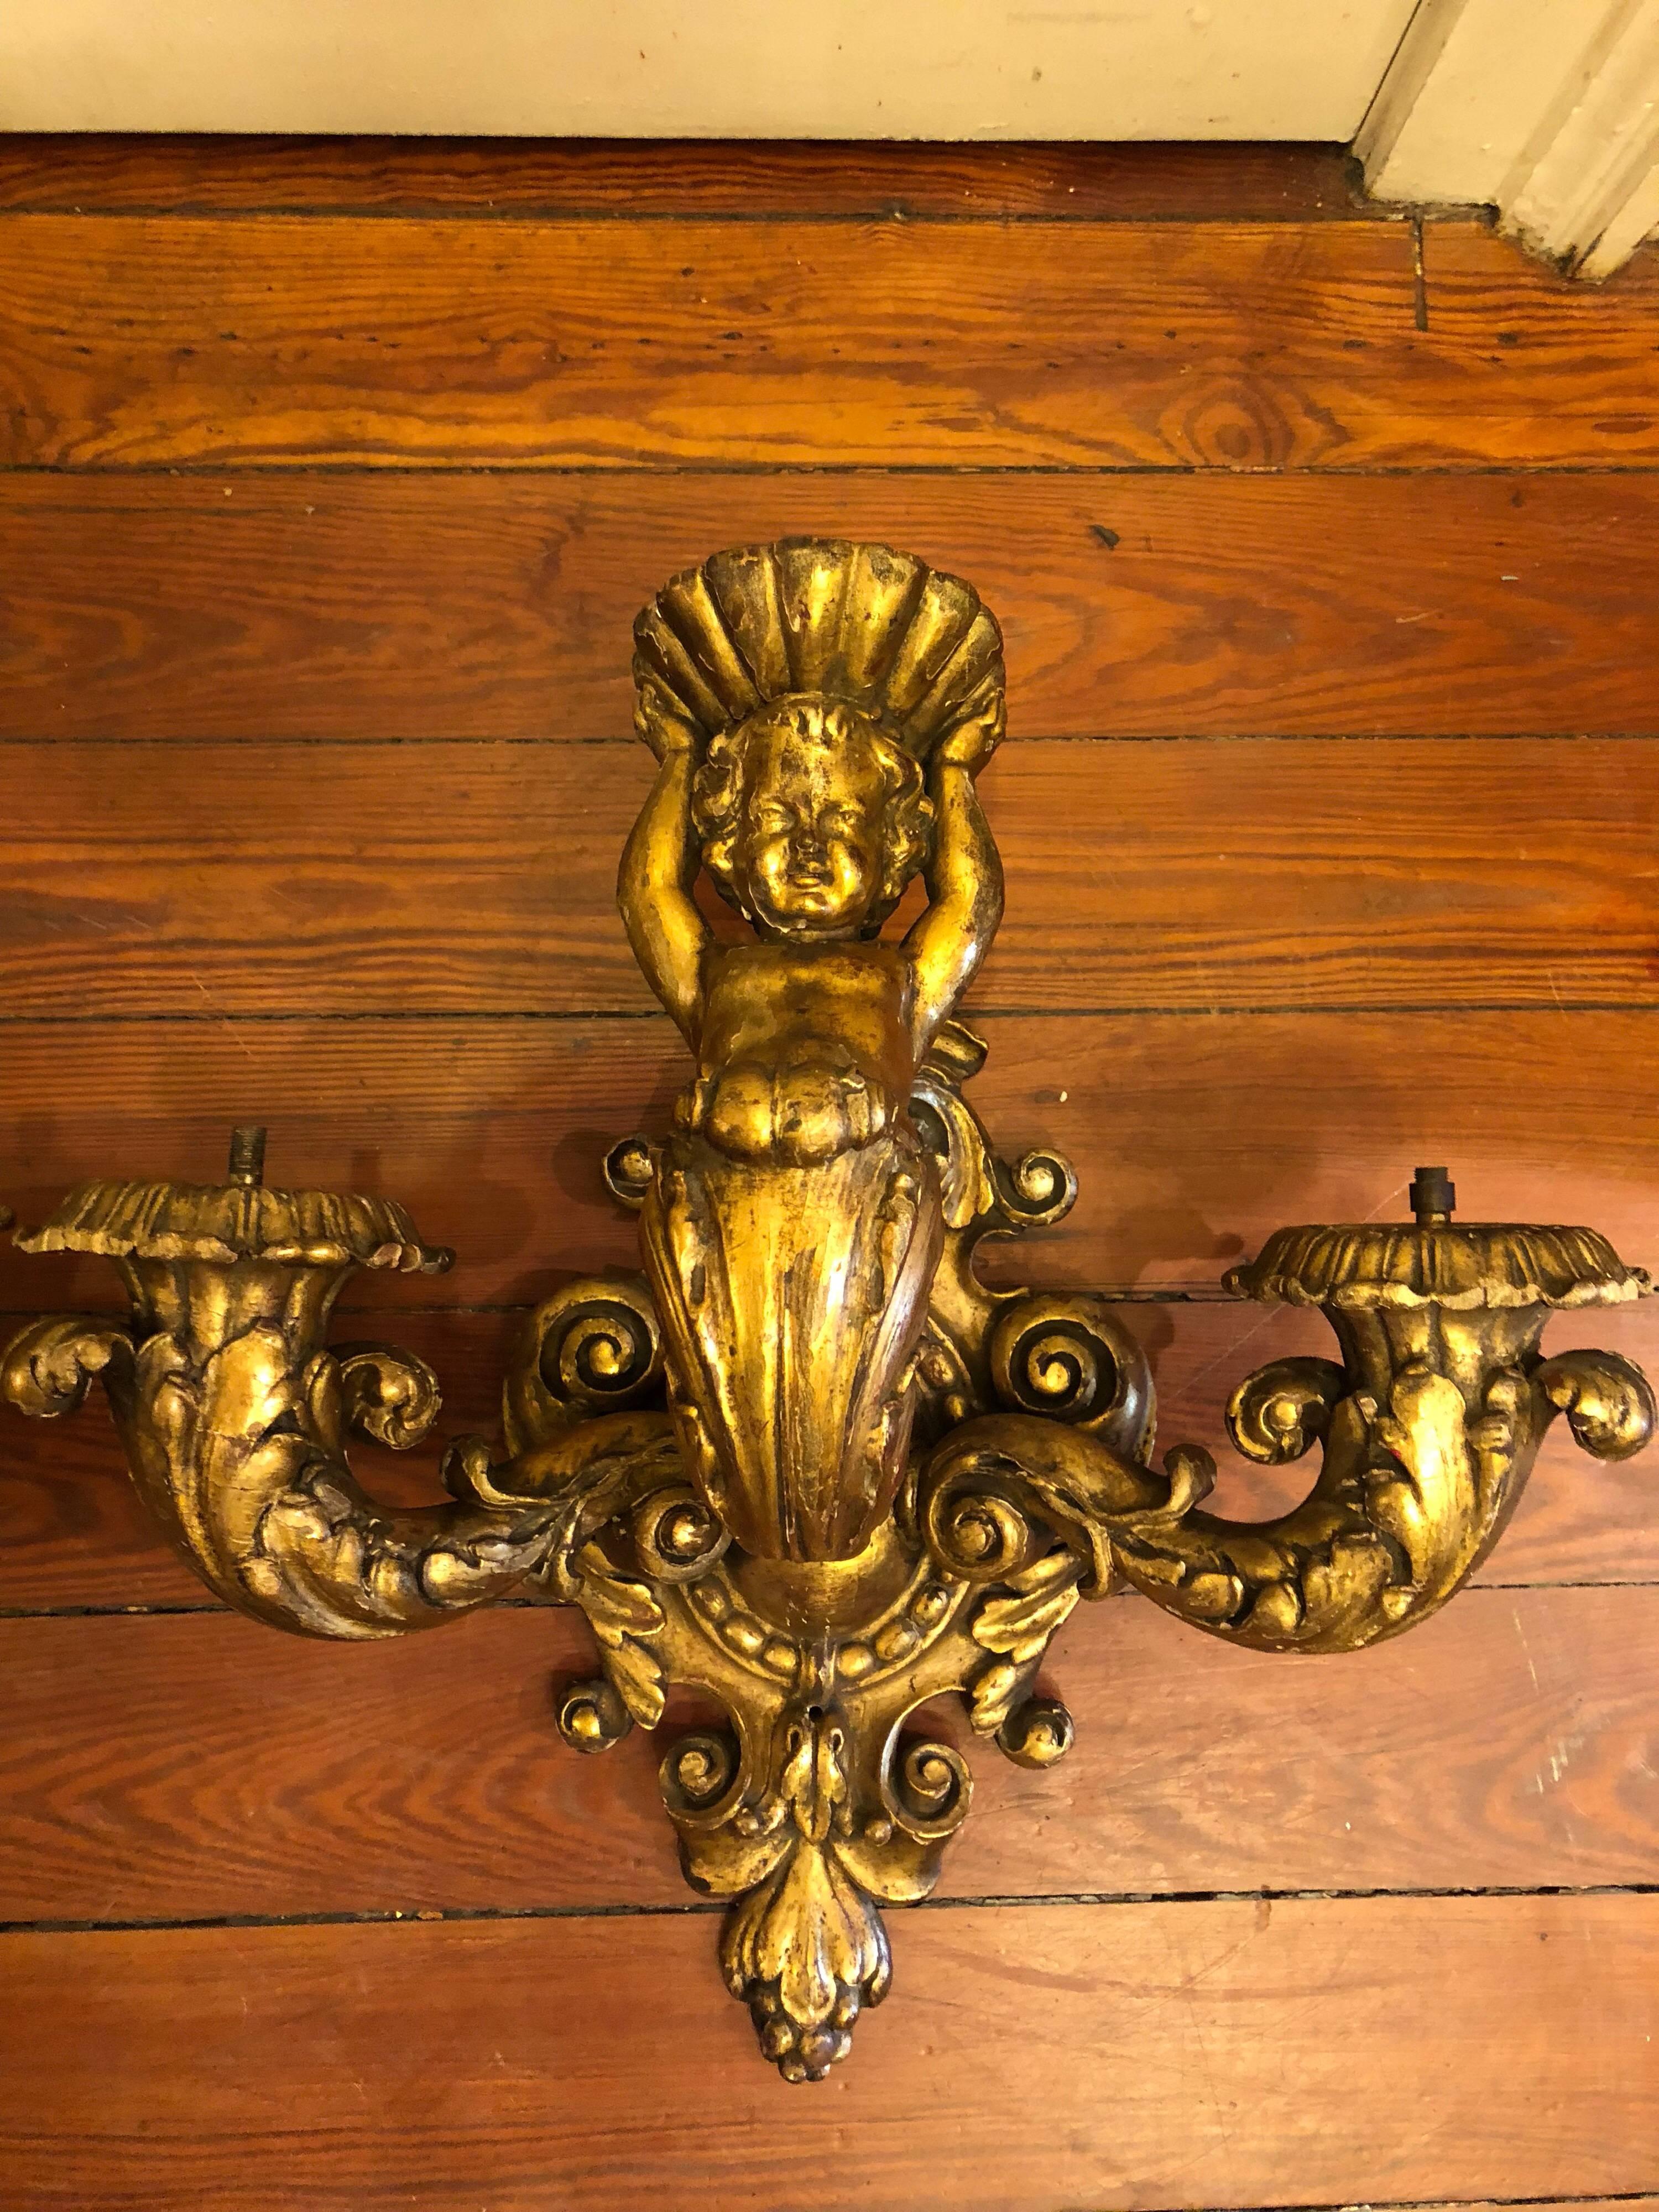 Pair of Italian 19th century carved giltwood wall sconces probably originally gas. Having cherubs holding a shell in the central stem with two foliate stems on each side all on a foliate backplate.